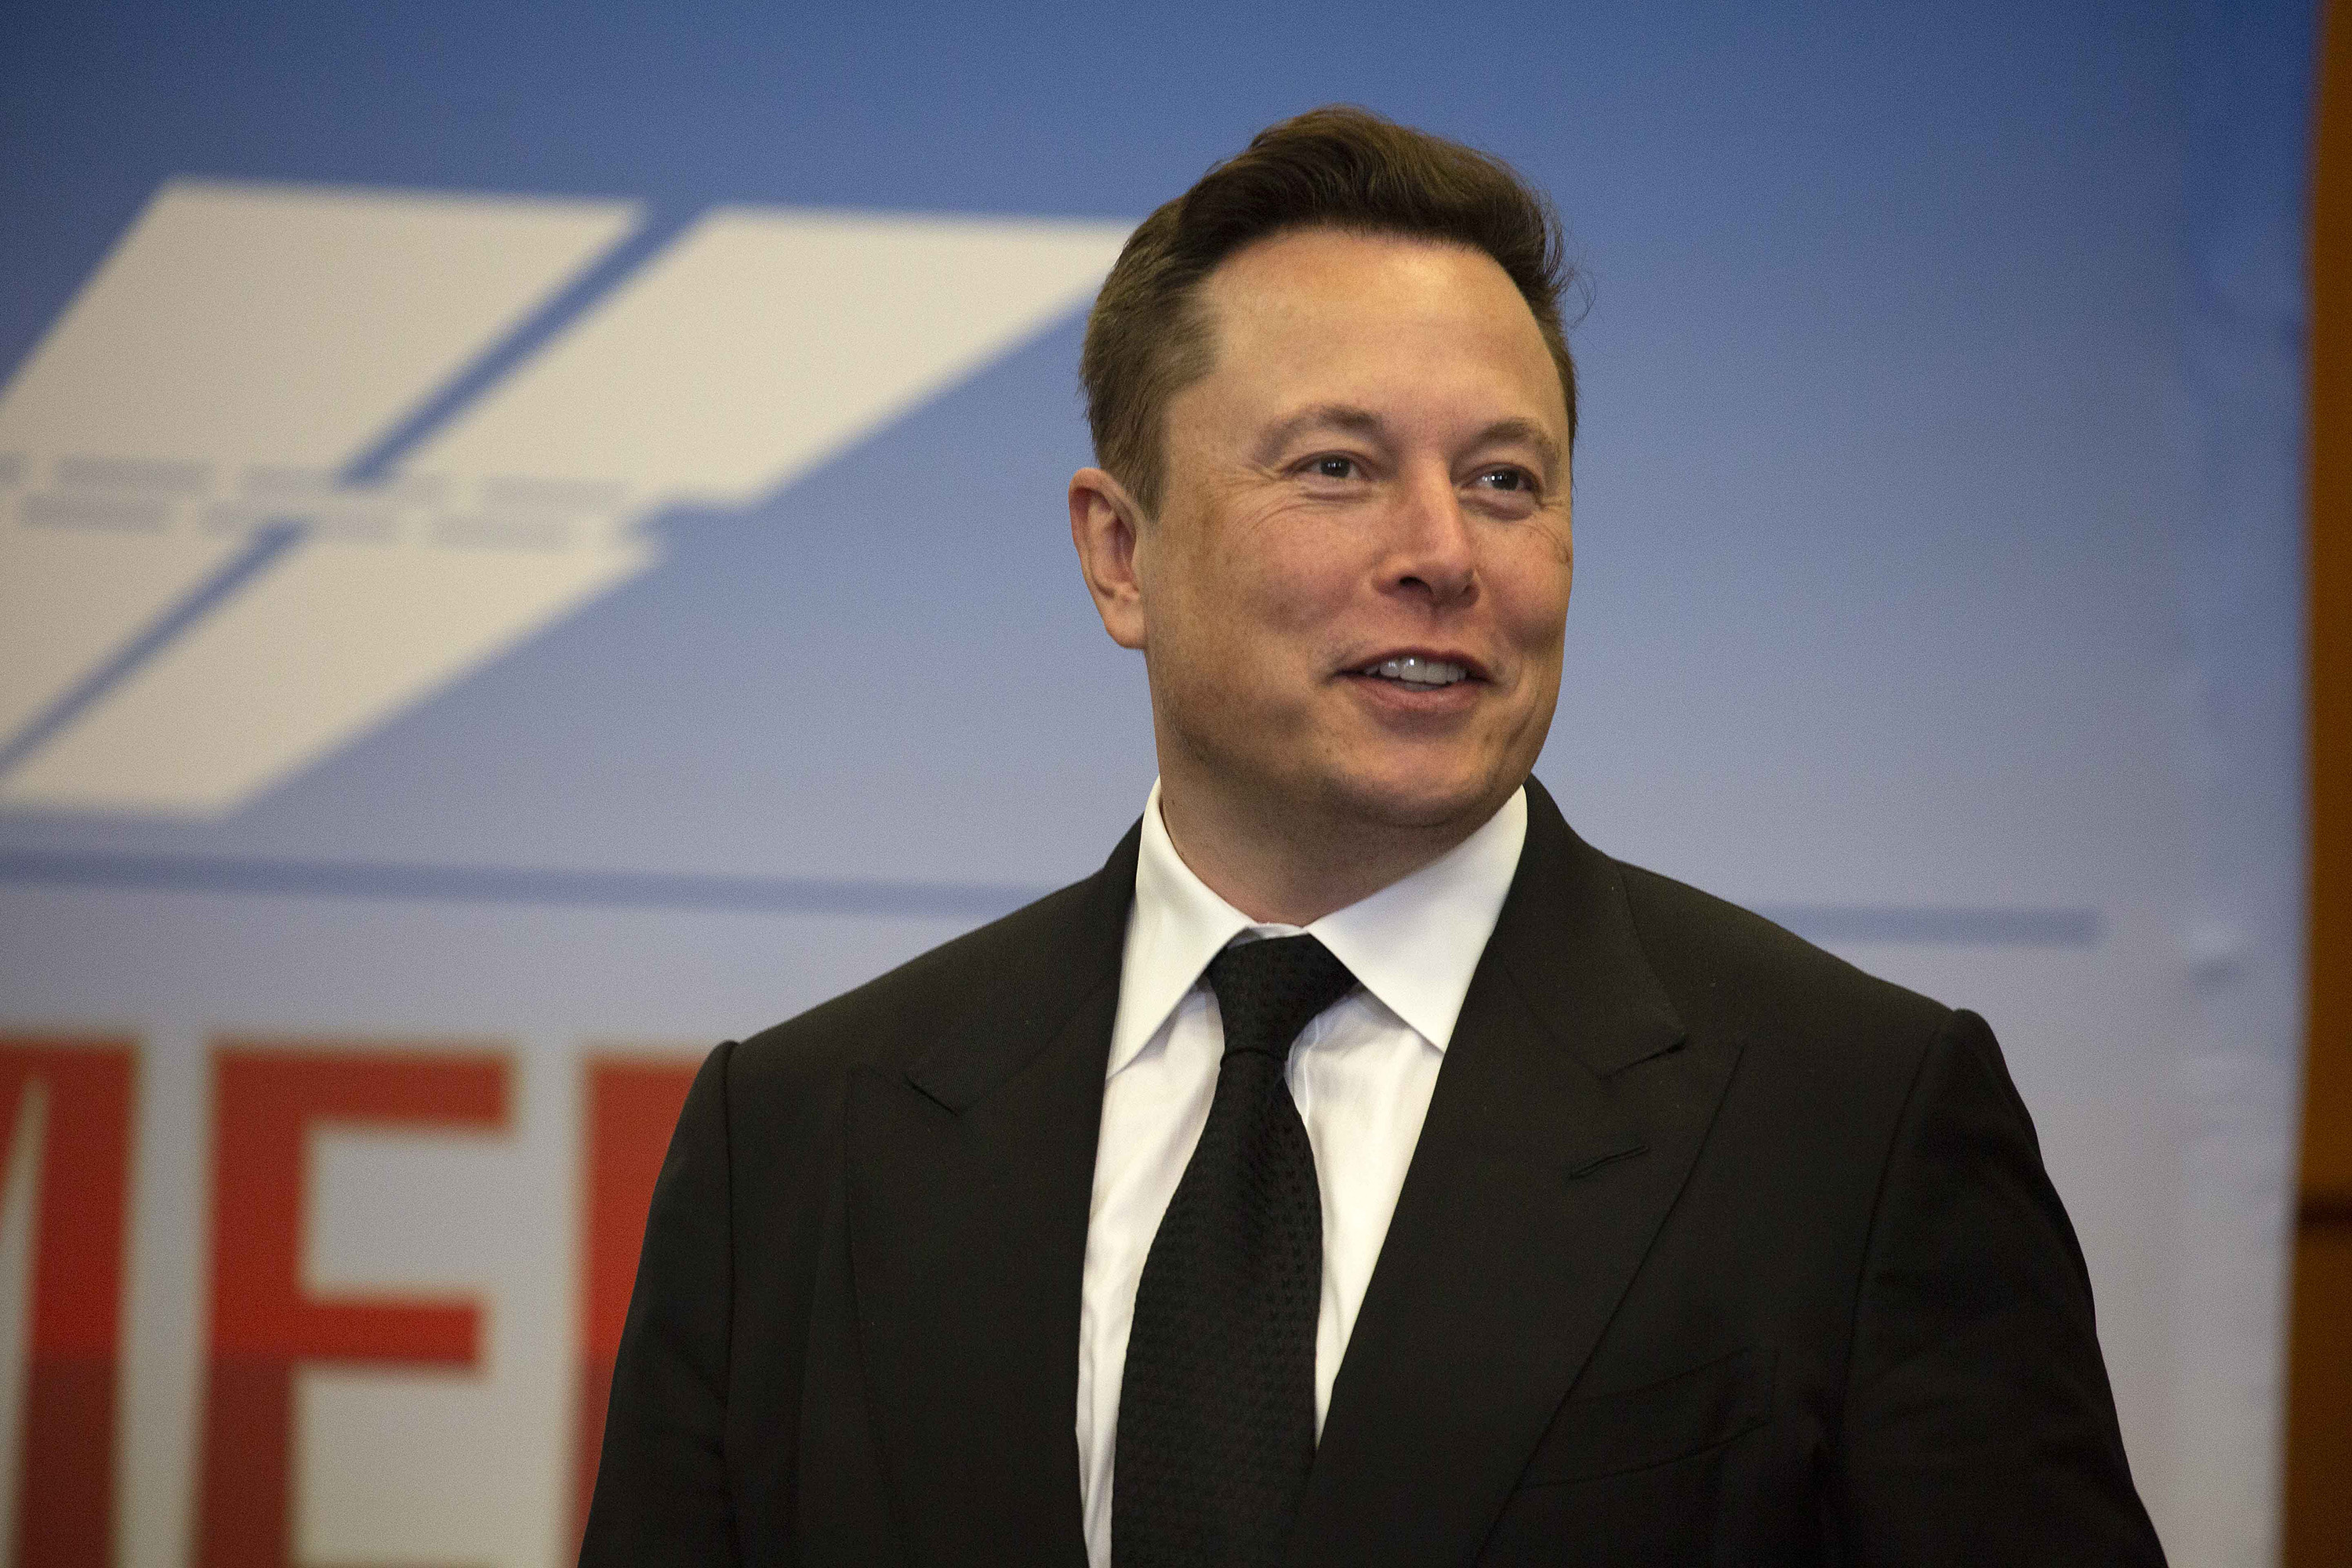 Musk Backs Out of Twitter Deal